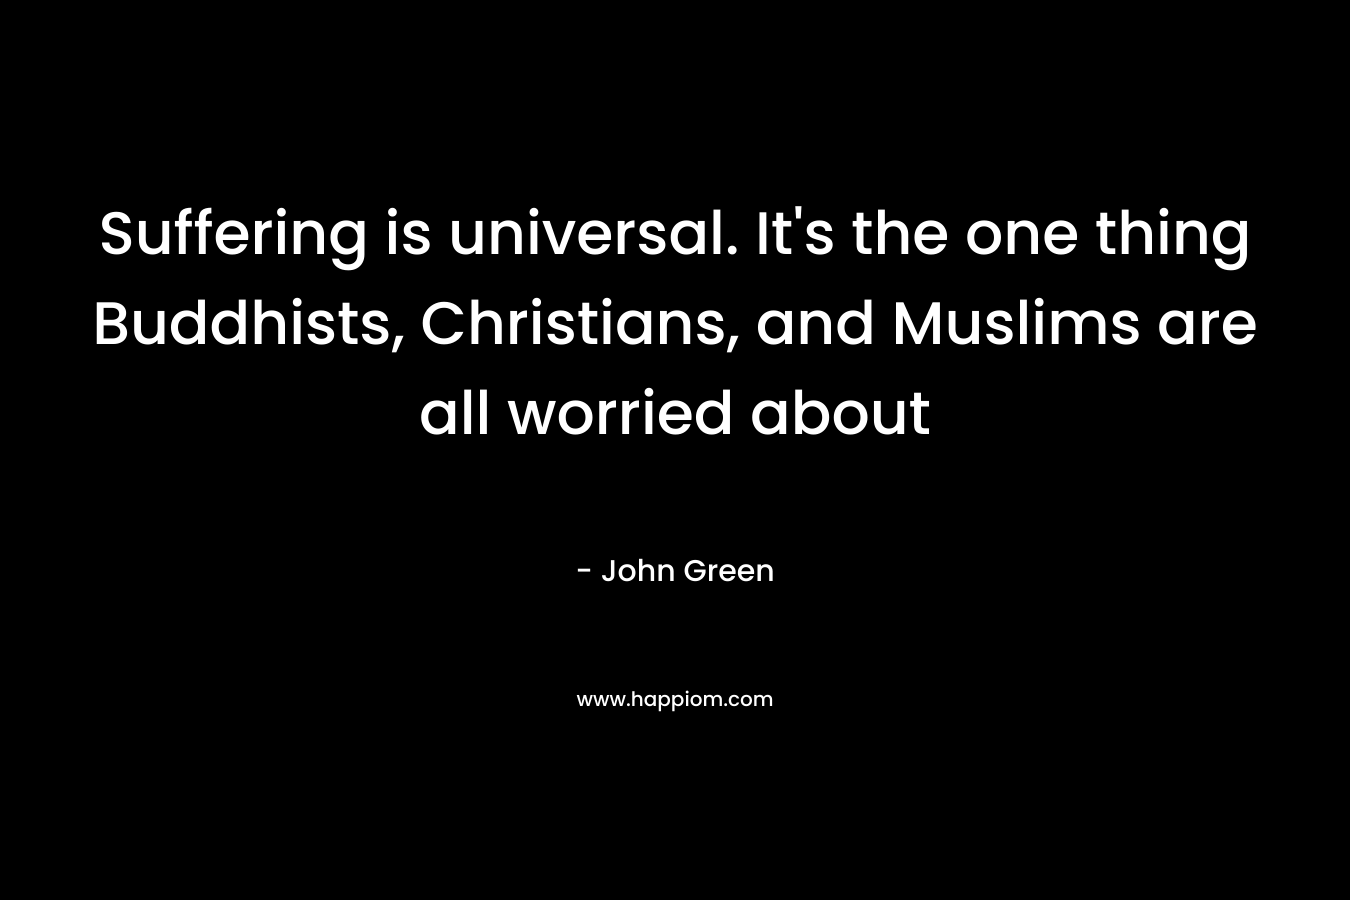 Suffering is universal. It's the one thing Buddhists, Christians, and Muslims are all worried about